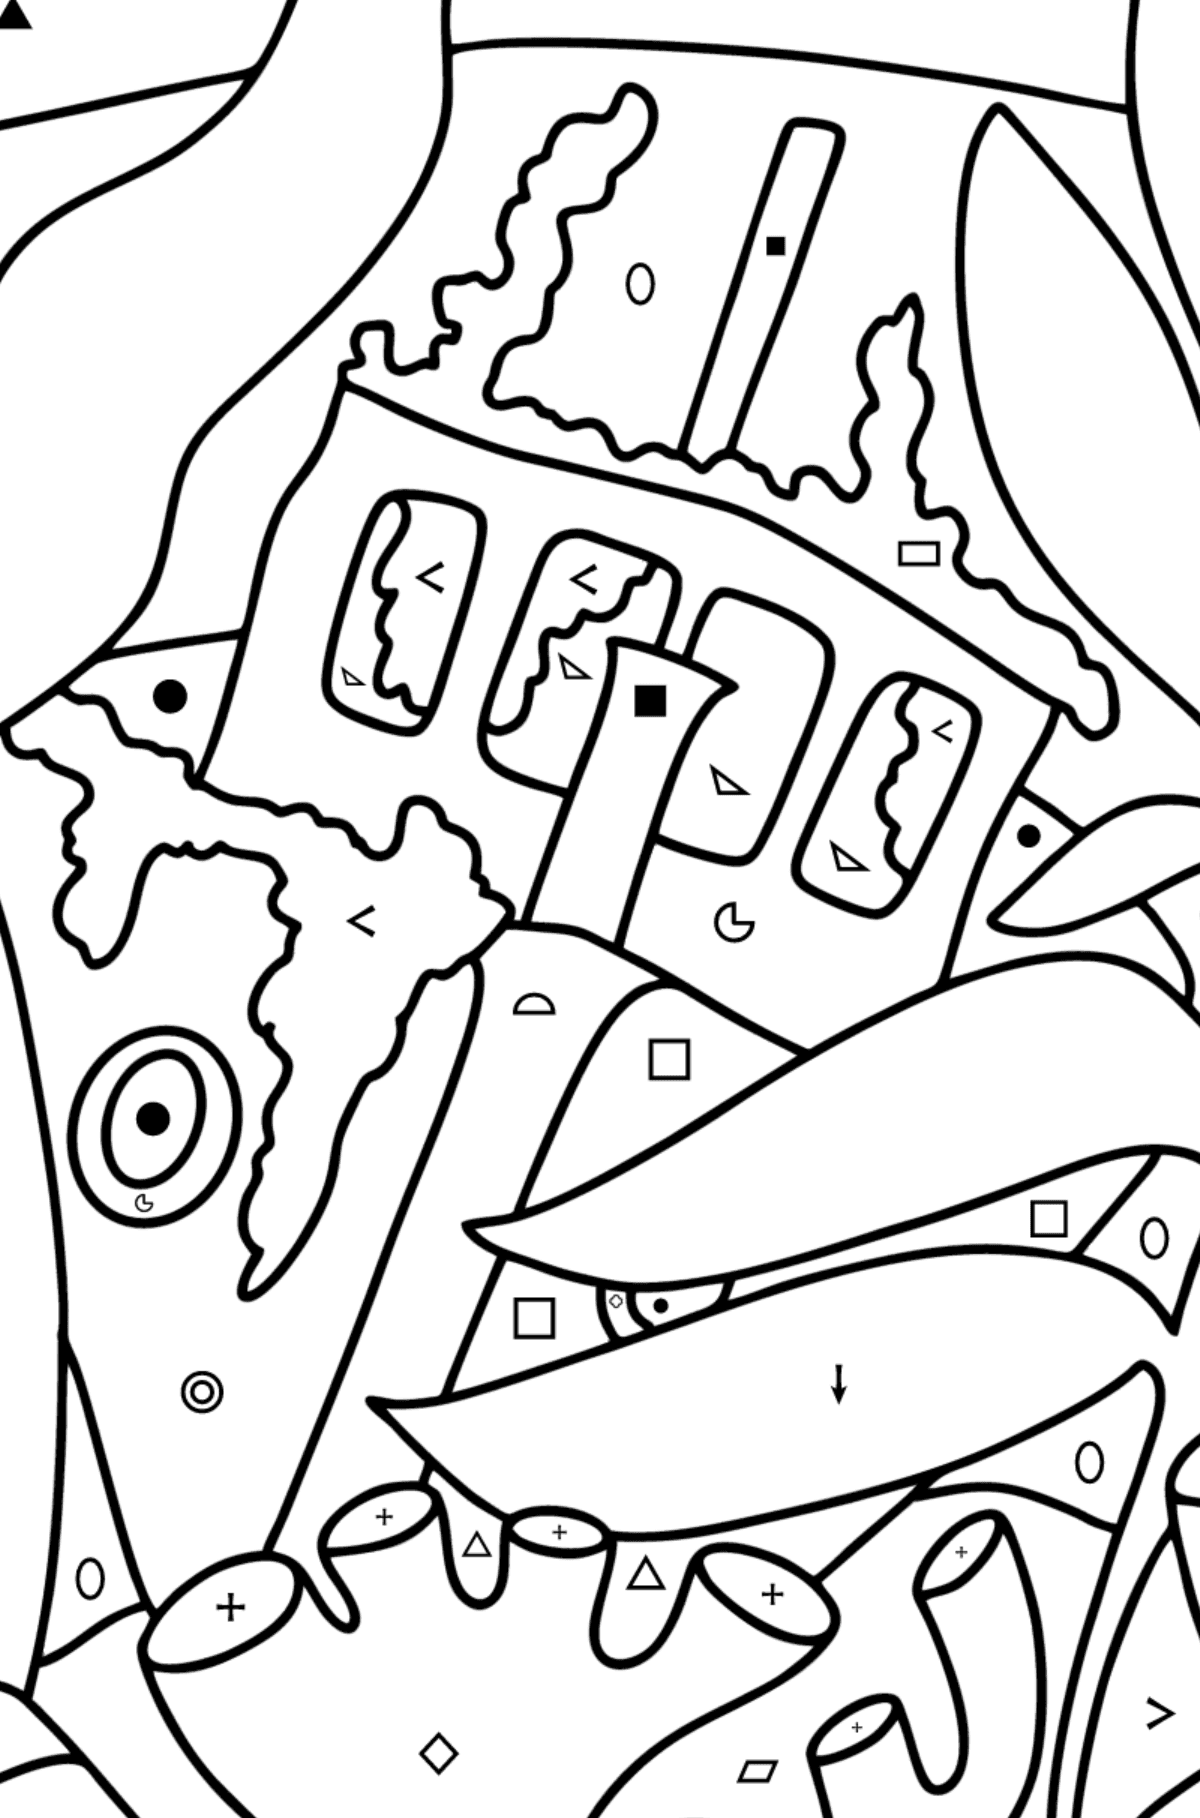 Sunken ship coloring page - Coloring by Symbols and Geometric Shapes for Kids